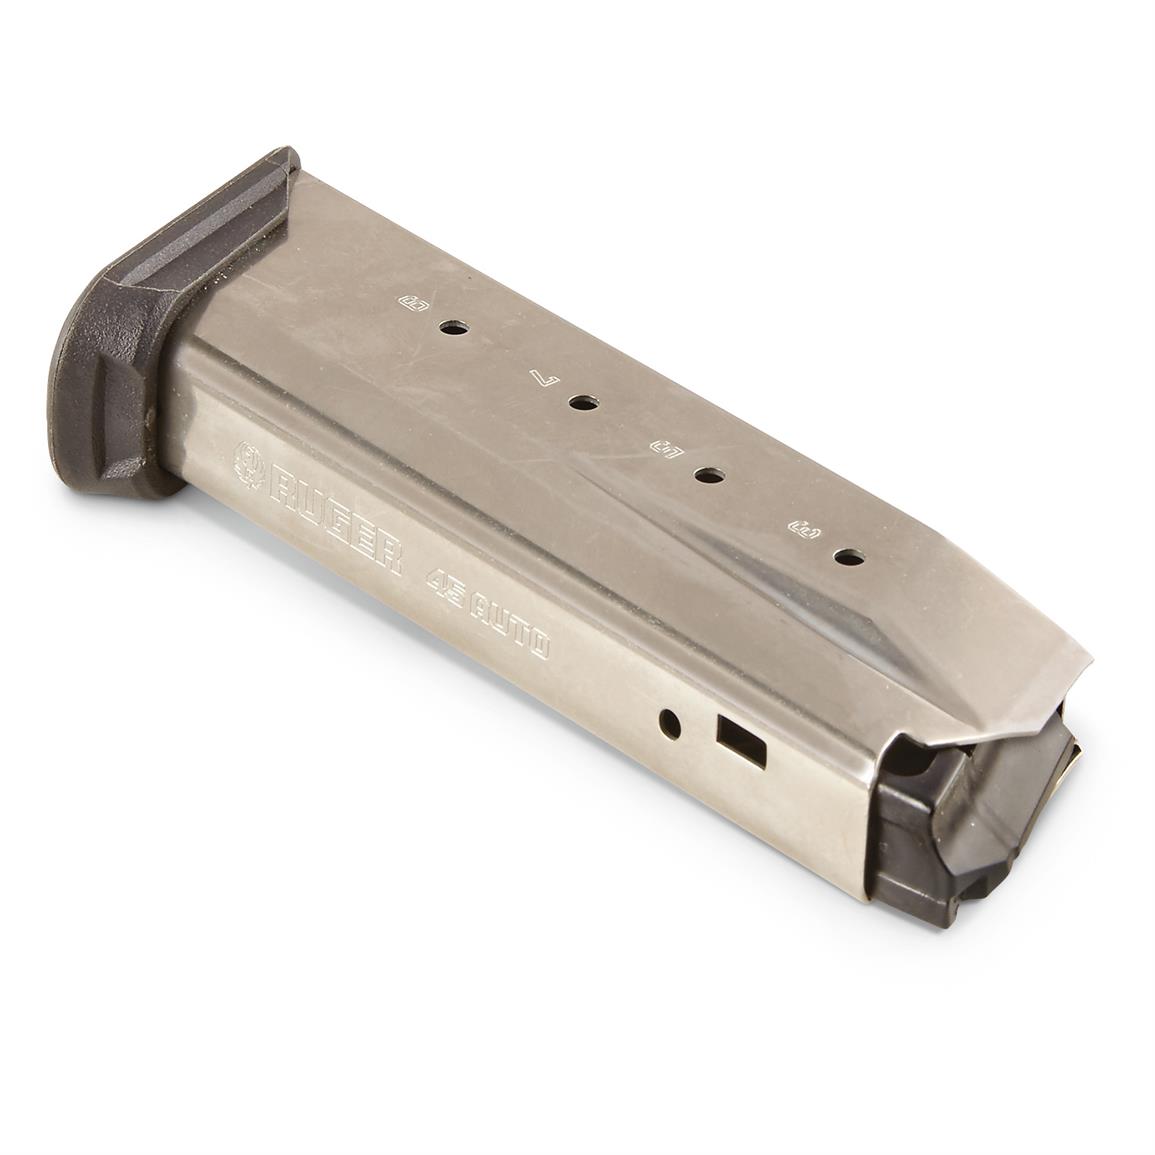 Ruger American, .45 ACP Caliber Magazine, 10 Rounds